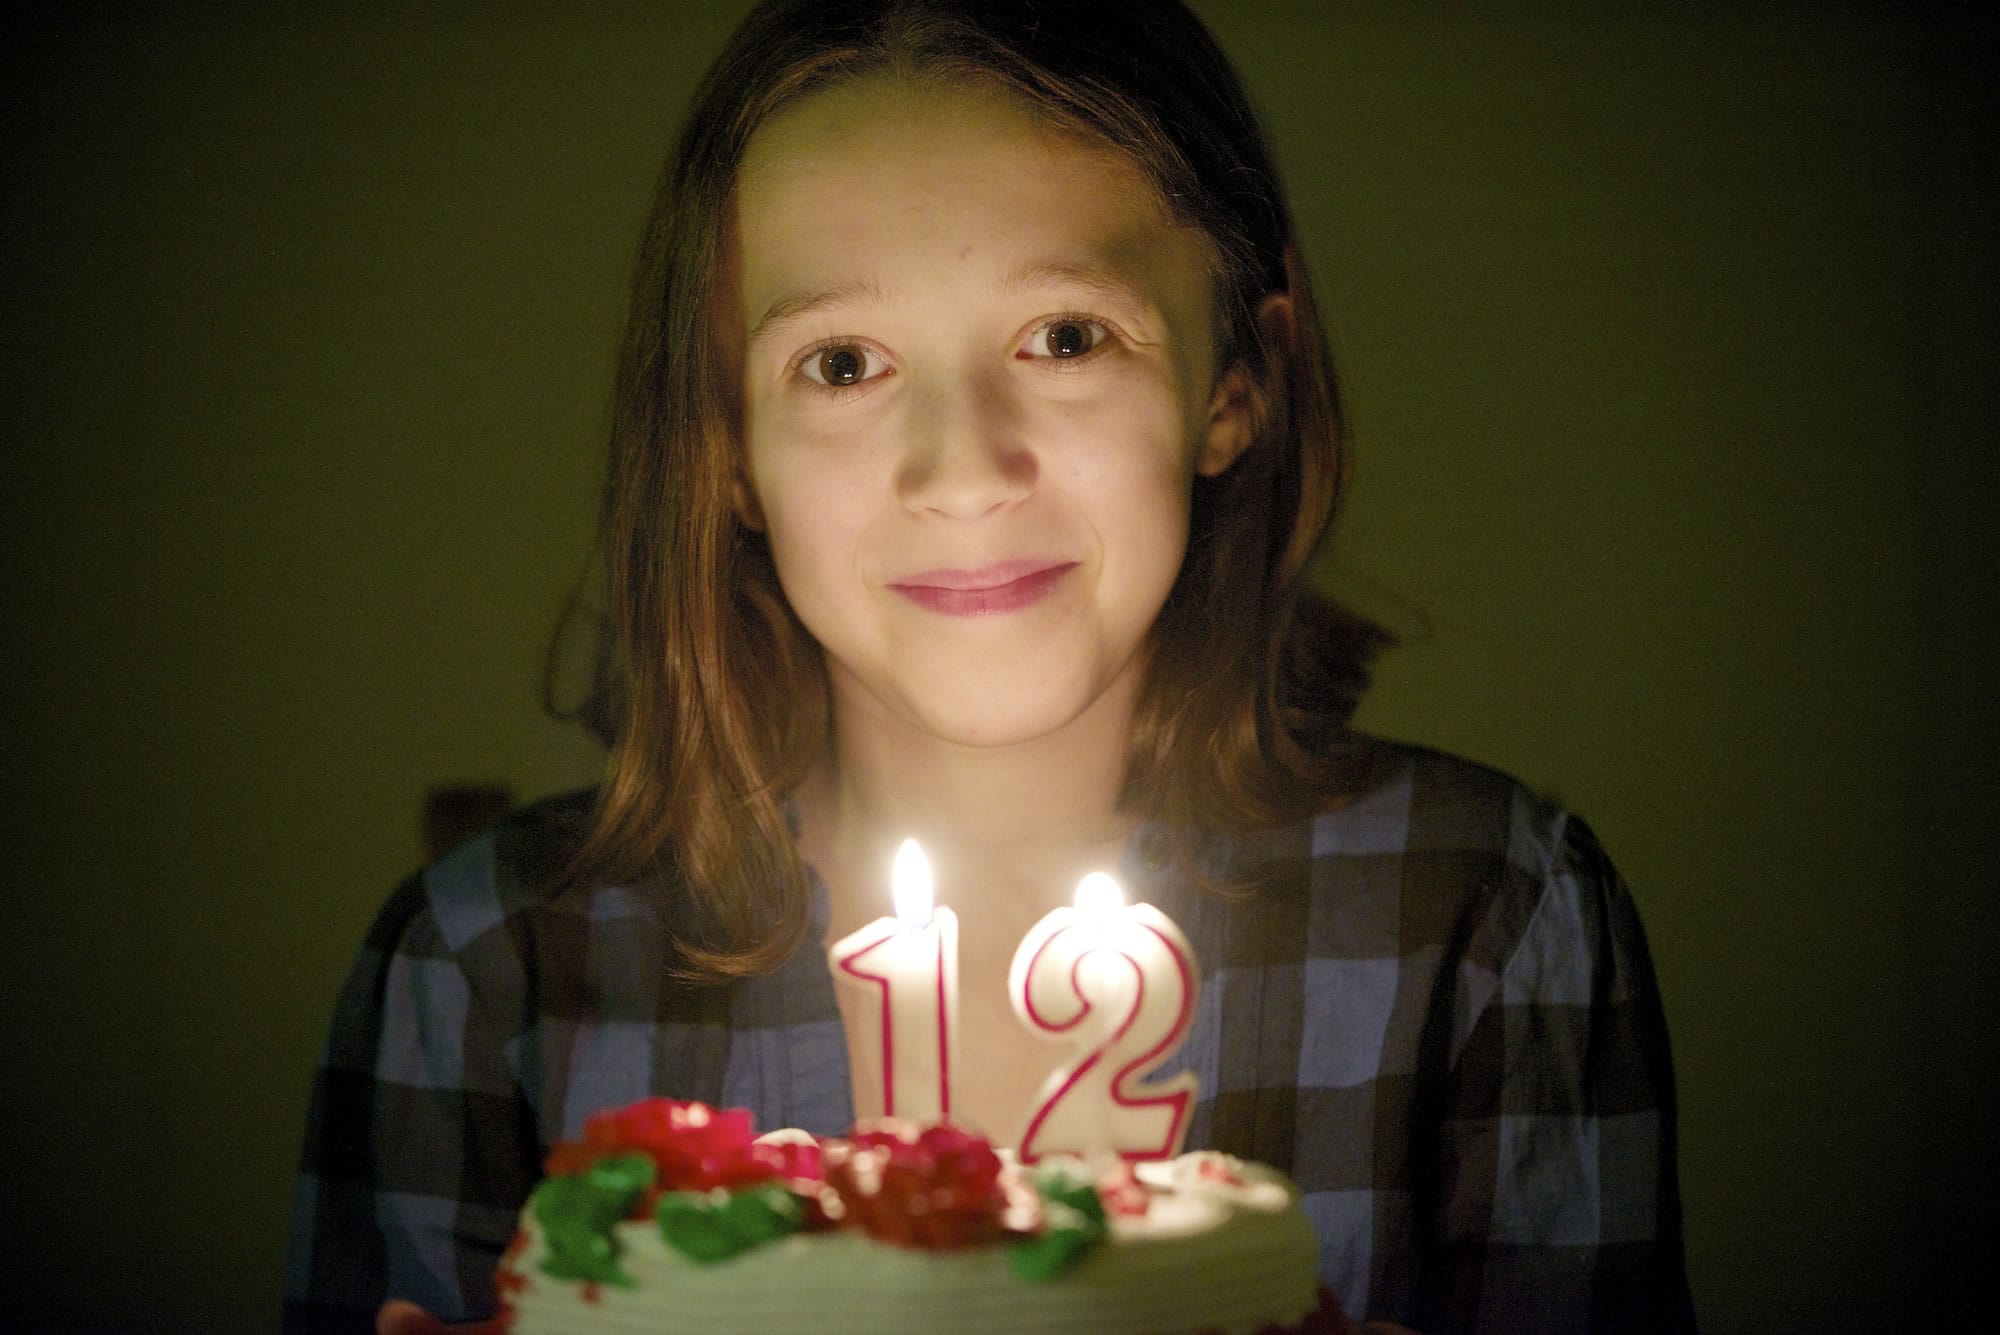 Megan Meek, from Battle Ground, joked with friends that her 12th birthday today, 12/12/12, is so unique in its symmetry that it just might cause a &quot;ripple in the space-time continuum.&quot; If you're reading this, that cataclysmic prediction did not occur.